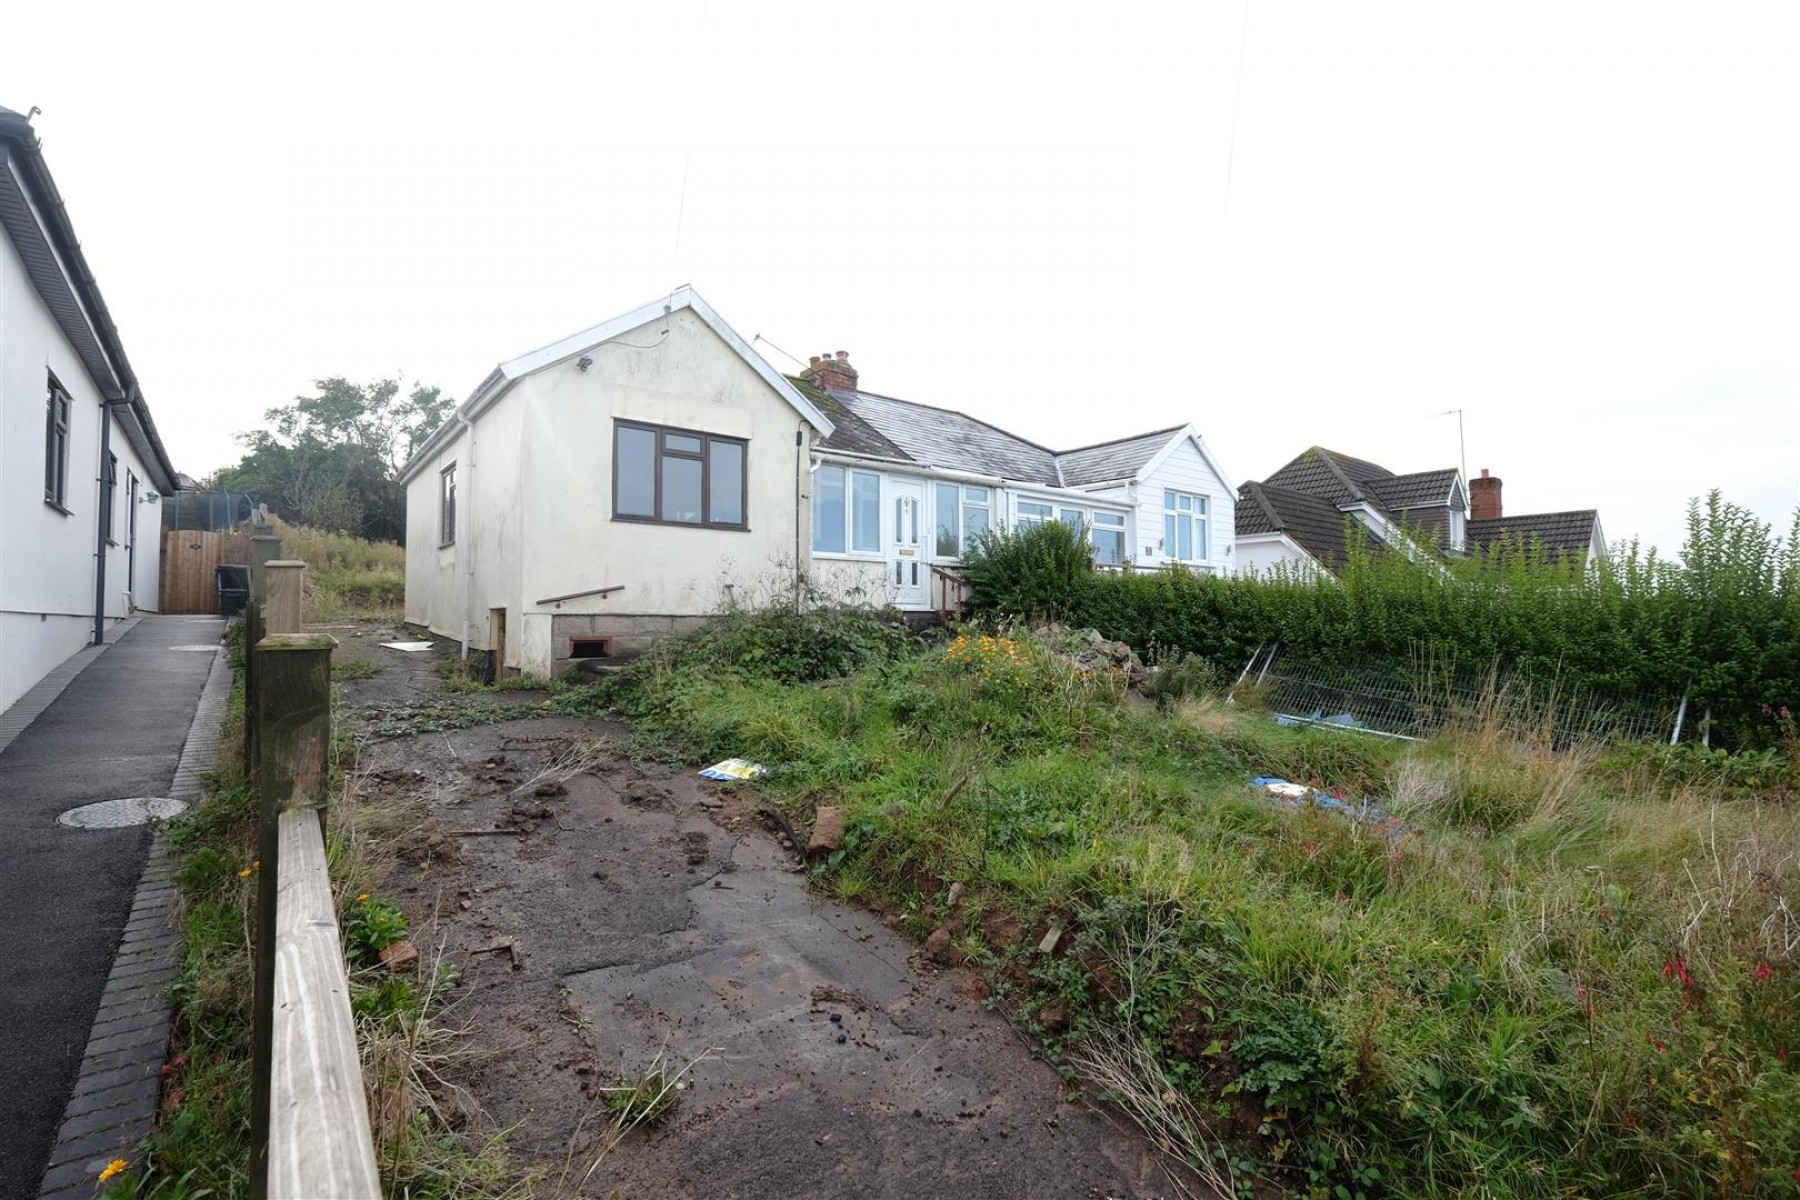 Images for PLANNING GRANTED - DETACHED BUNGALOW